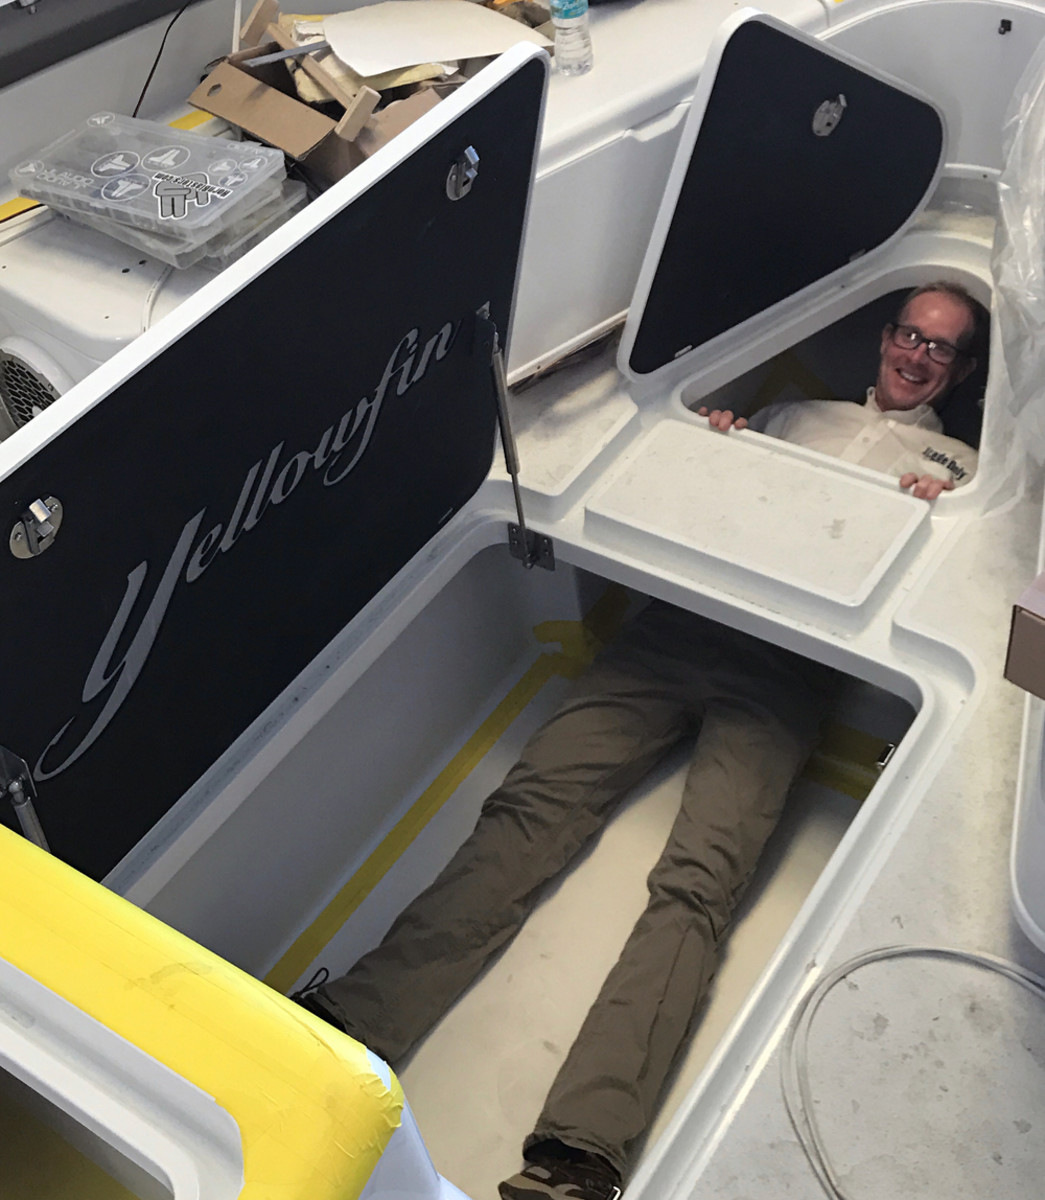 Turner’s boat has a custom foredeck fishbox to hold ice-immersed big tuna. Trade Only executive editor Chris Landry, who is 6 feet, 2 inches tall, shows just how big it is.